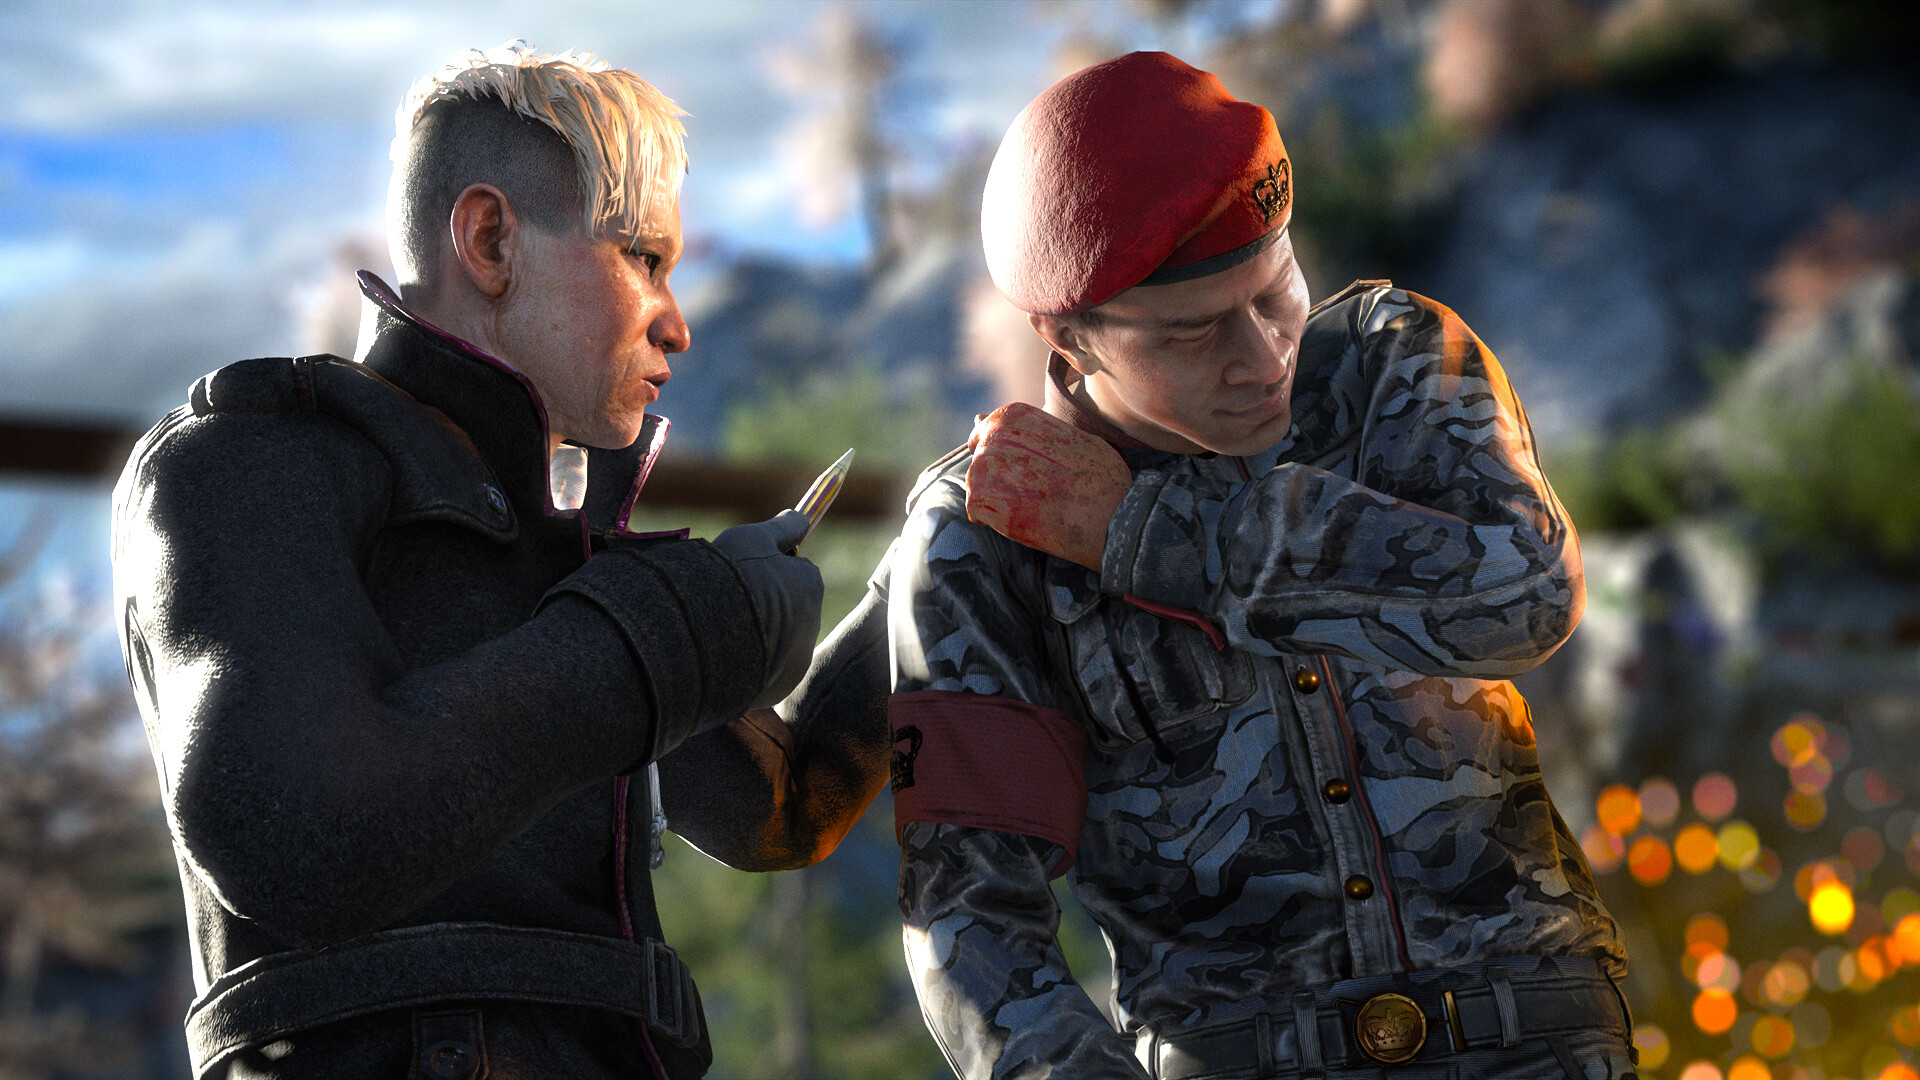 Buy Far Cry 4 - Escape From Durgesh Prison Ubisoft Connect Key GLOBAL -  Cheap - !